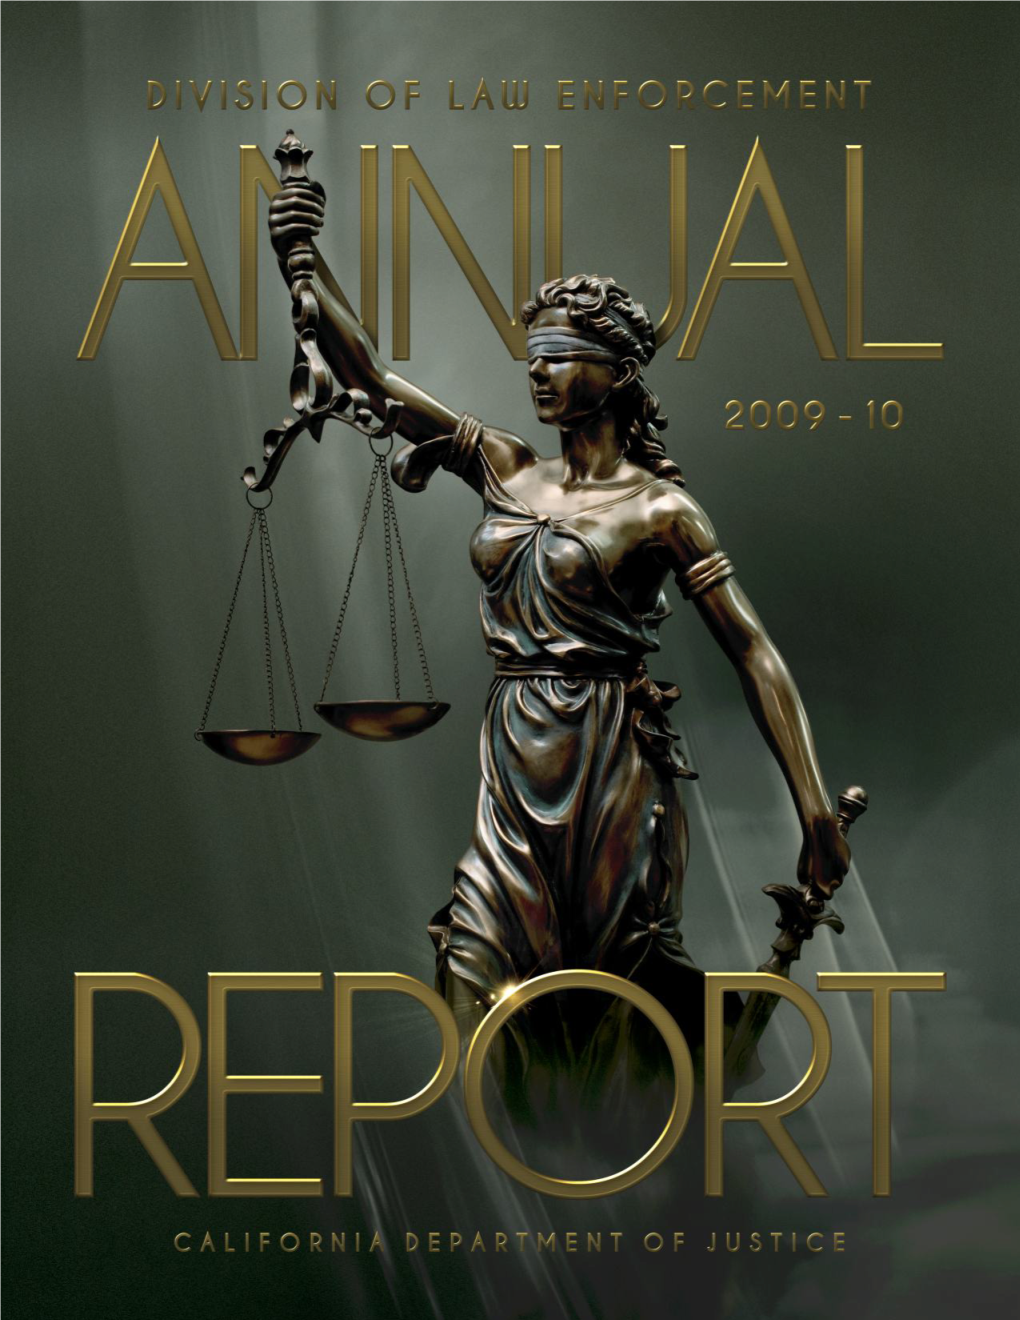 Division of Law Enforcement Fiscal Year 2008-09 Annual Report